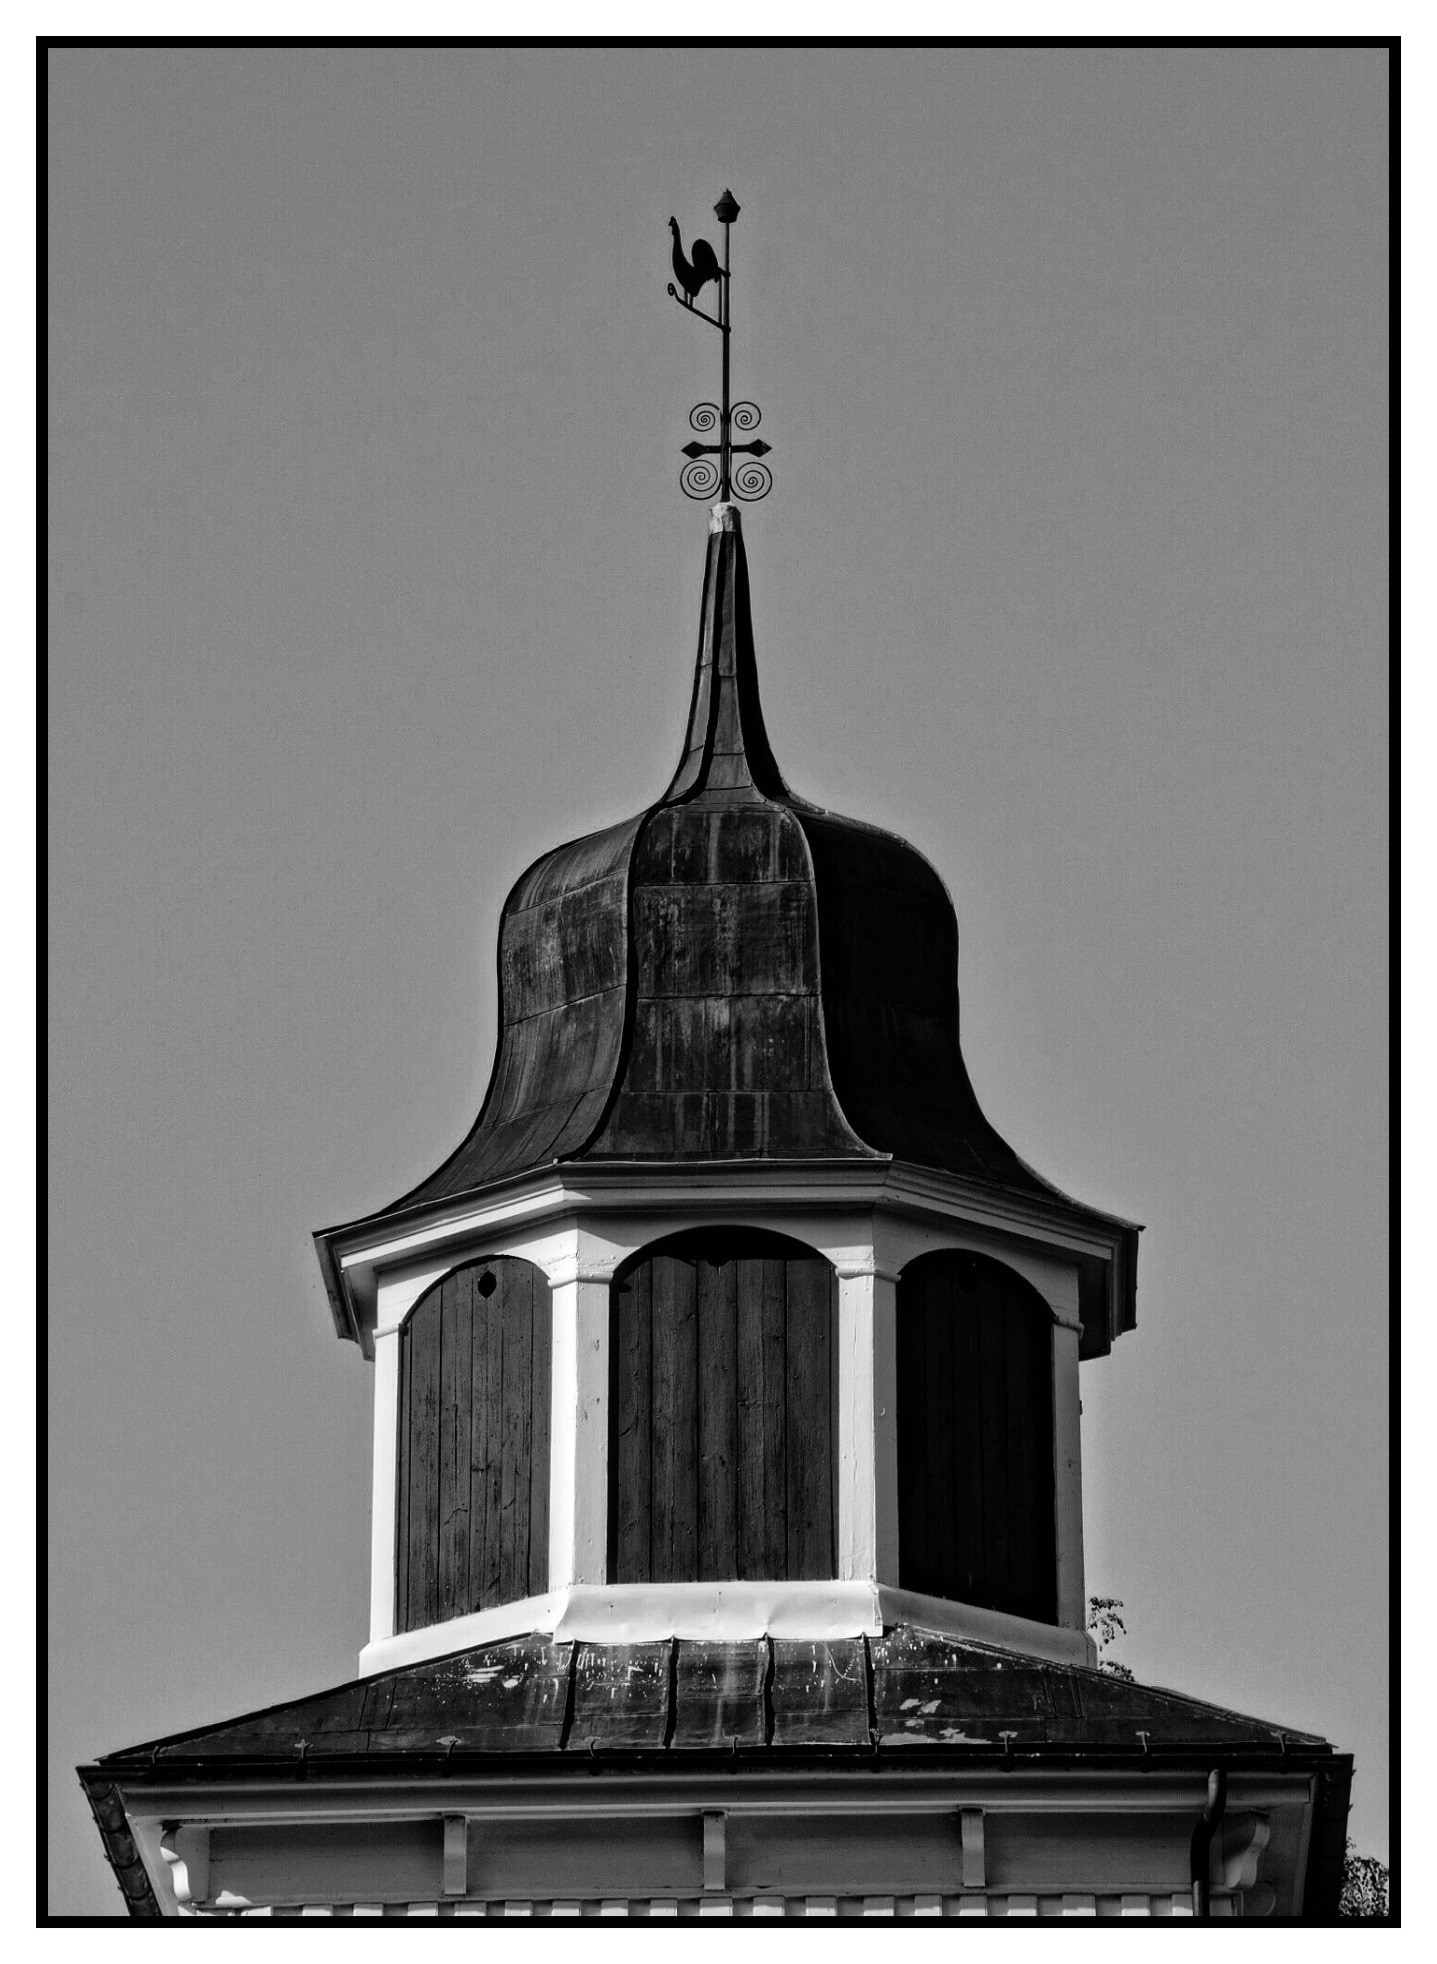 grey scale photo of tower